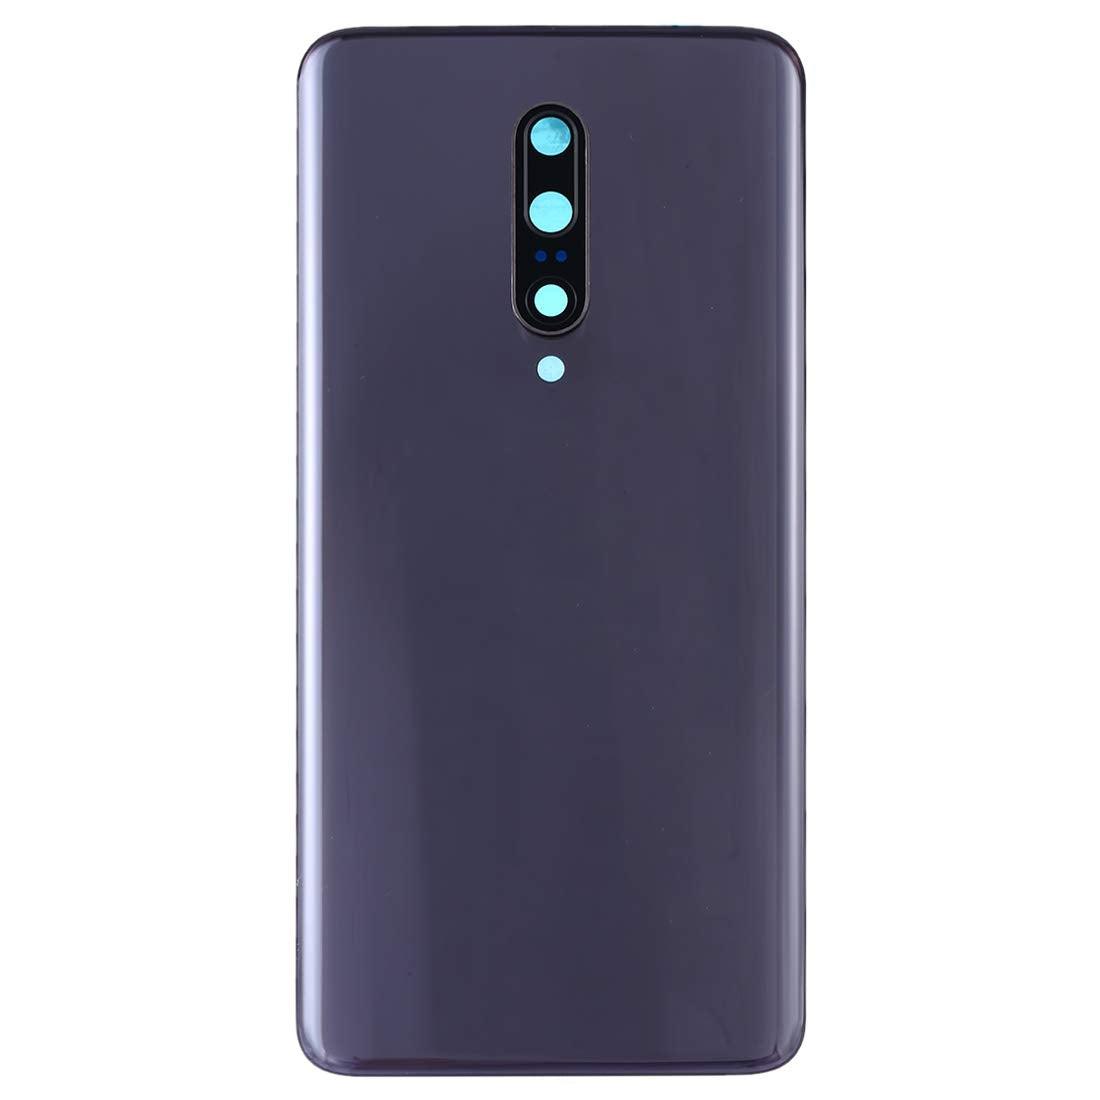 Back Glass Panel for Oneplus 7 Pro Grey